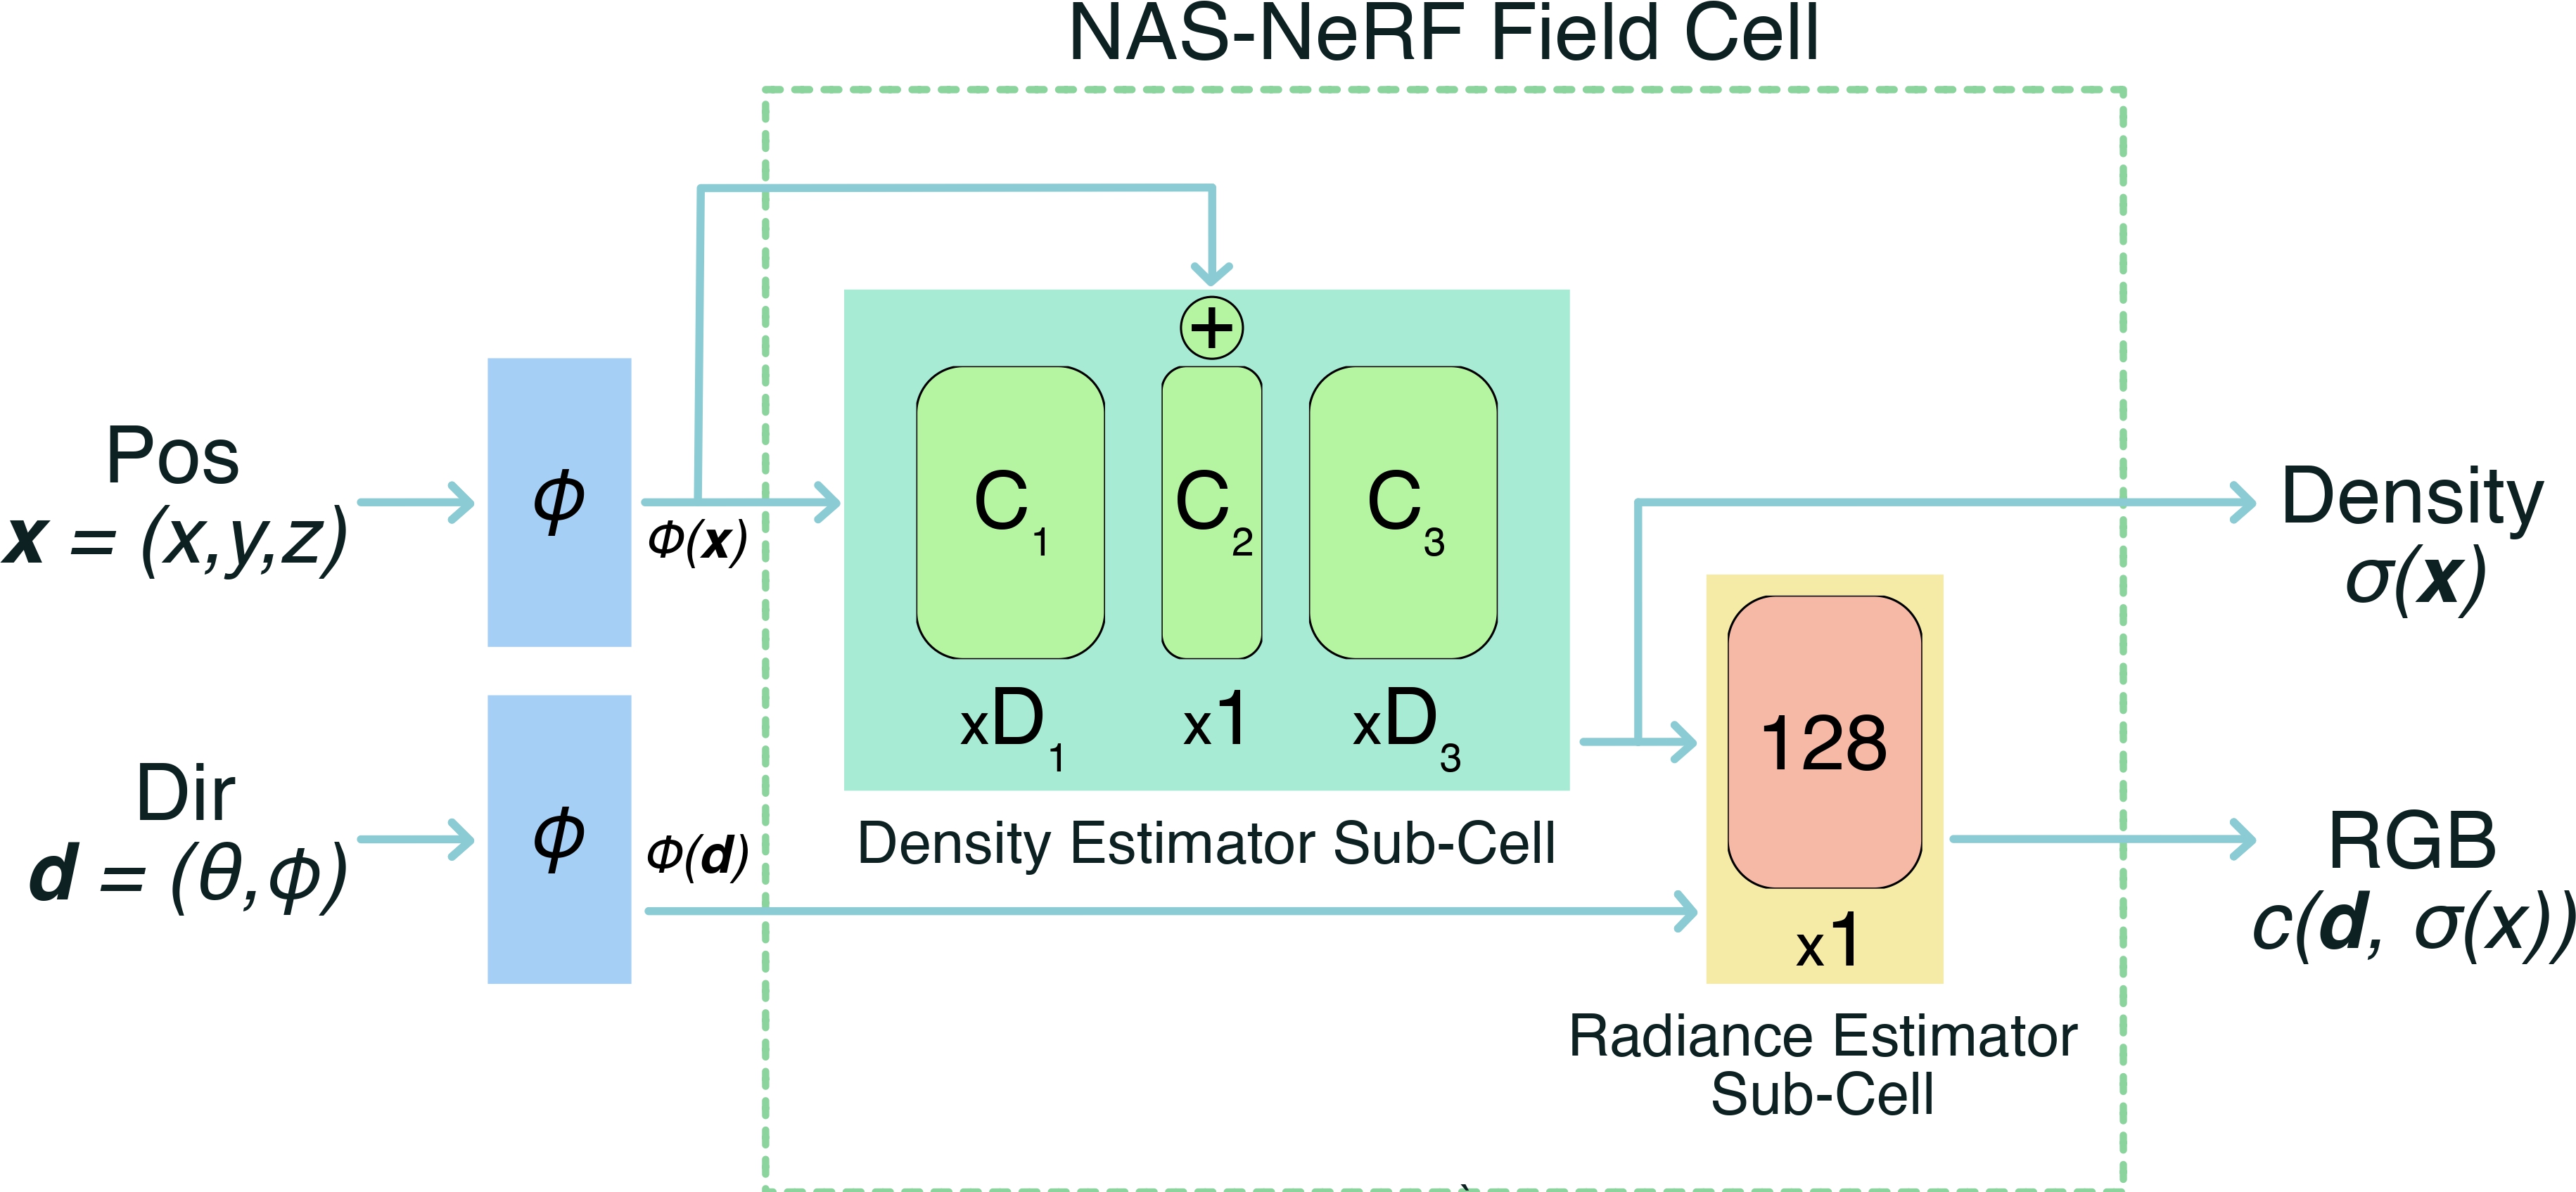 NAS-NeRF Field Cell